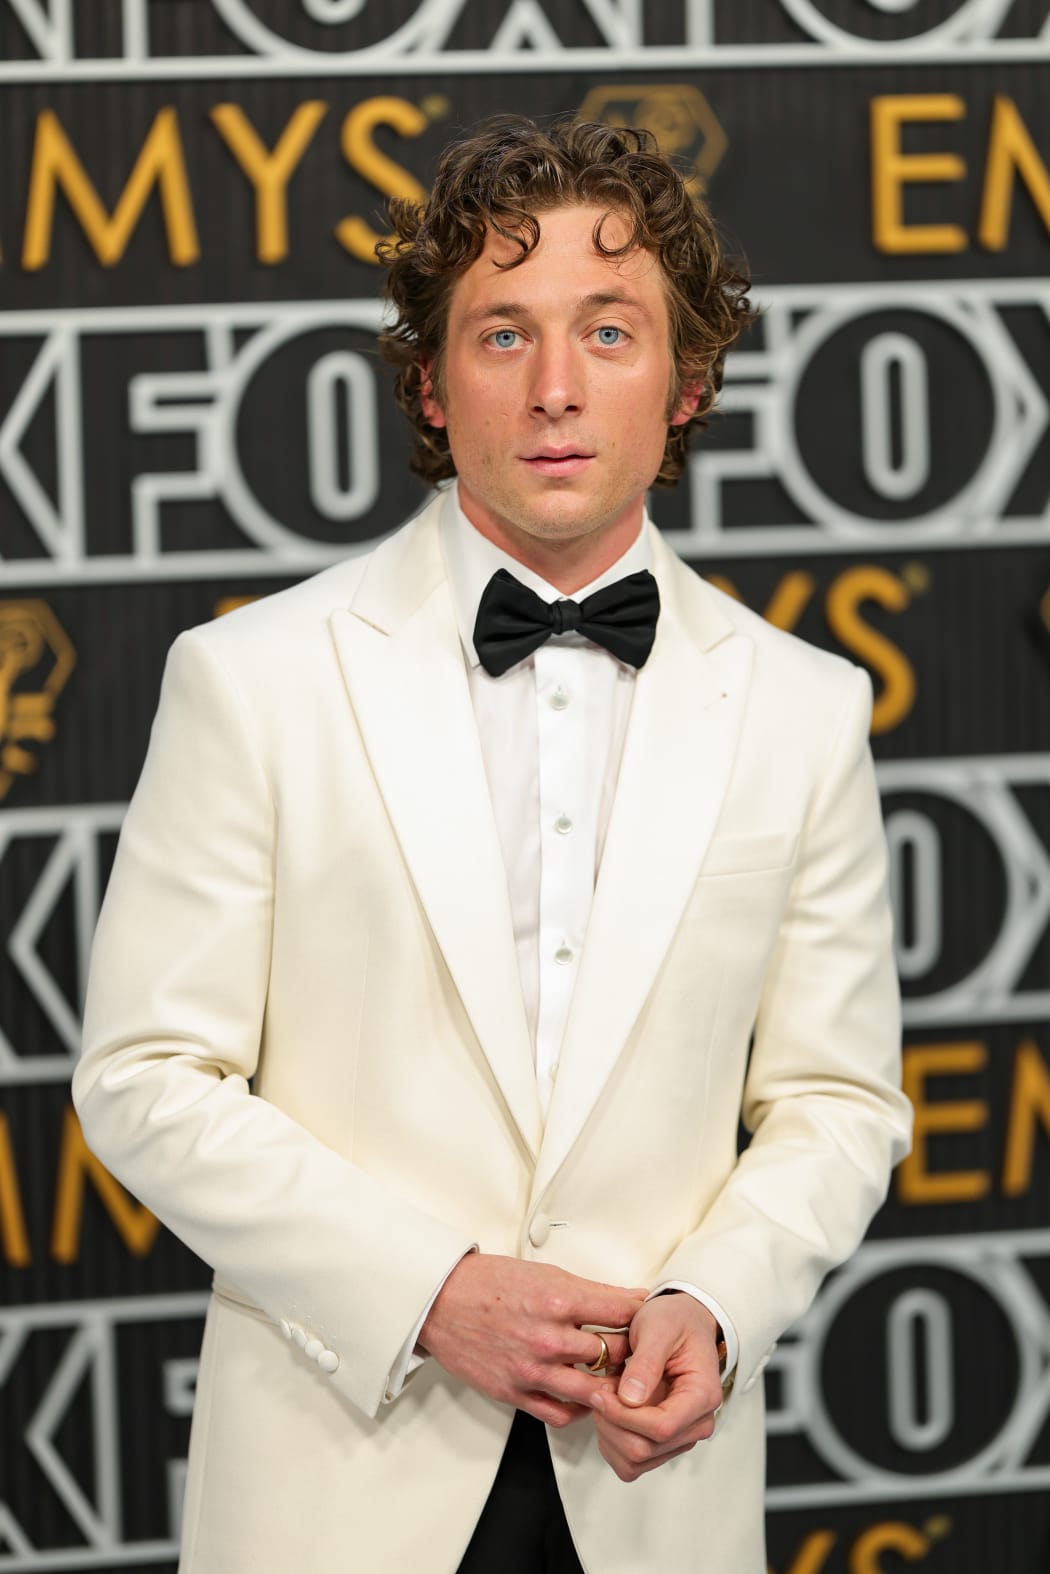 LOS ANGELES, CALIFORNIA - JANUARY 15: Jeremy Allen White attends the 75th Primetime Emmy Awards at Peacock Theater on January 15, 2024 in Los Angeles, California. (Photo by Neilson Barnard/Getty Images)